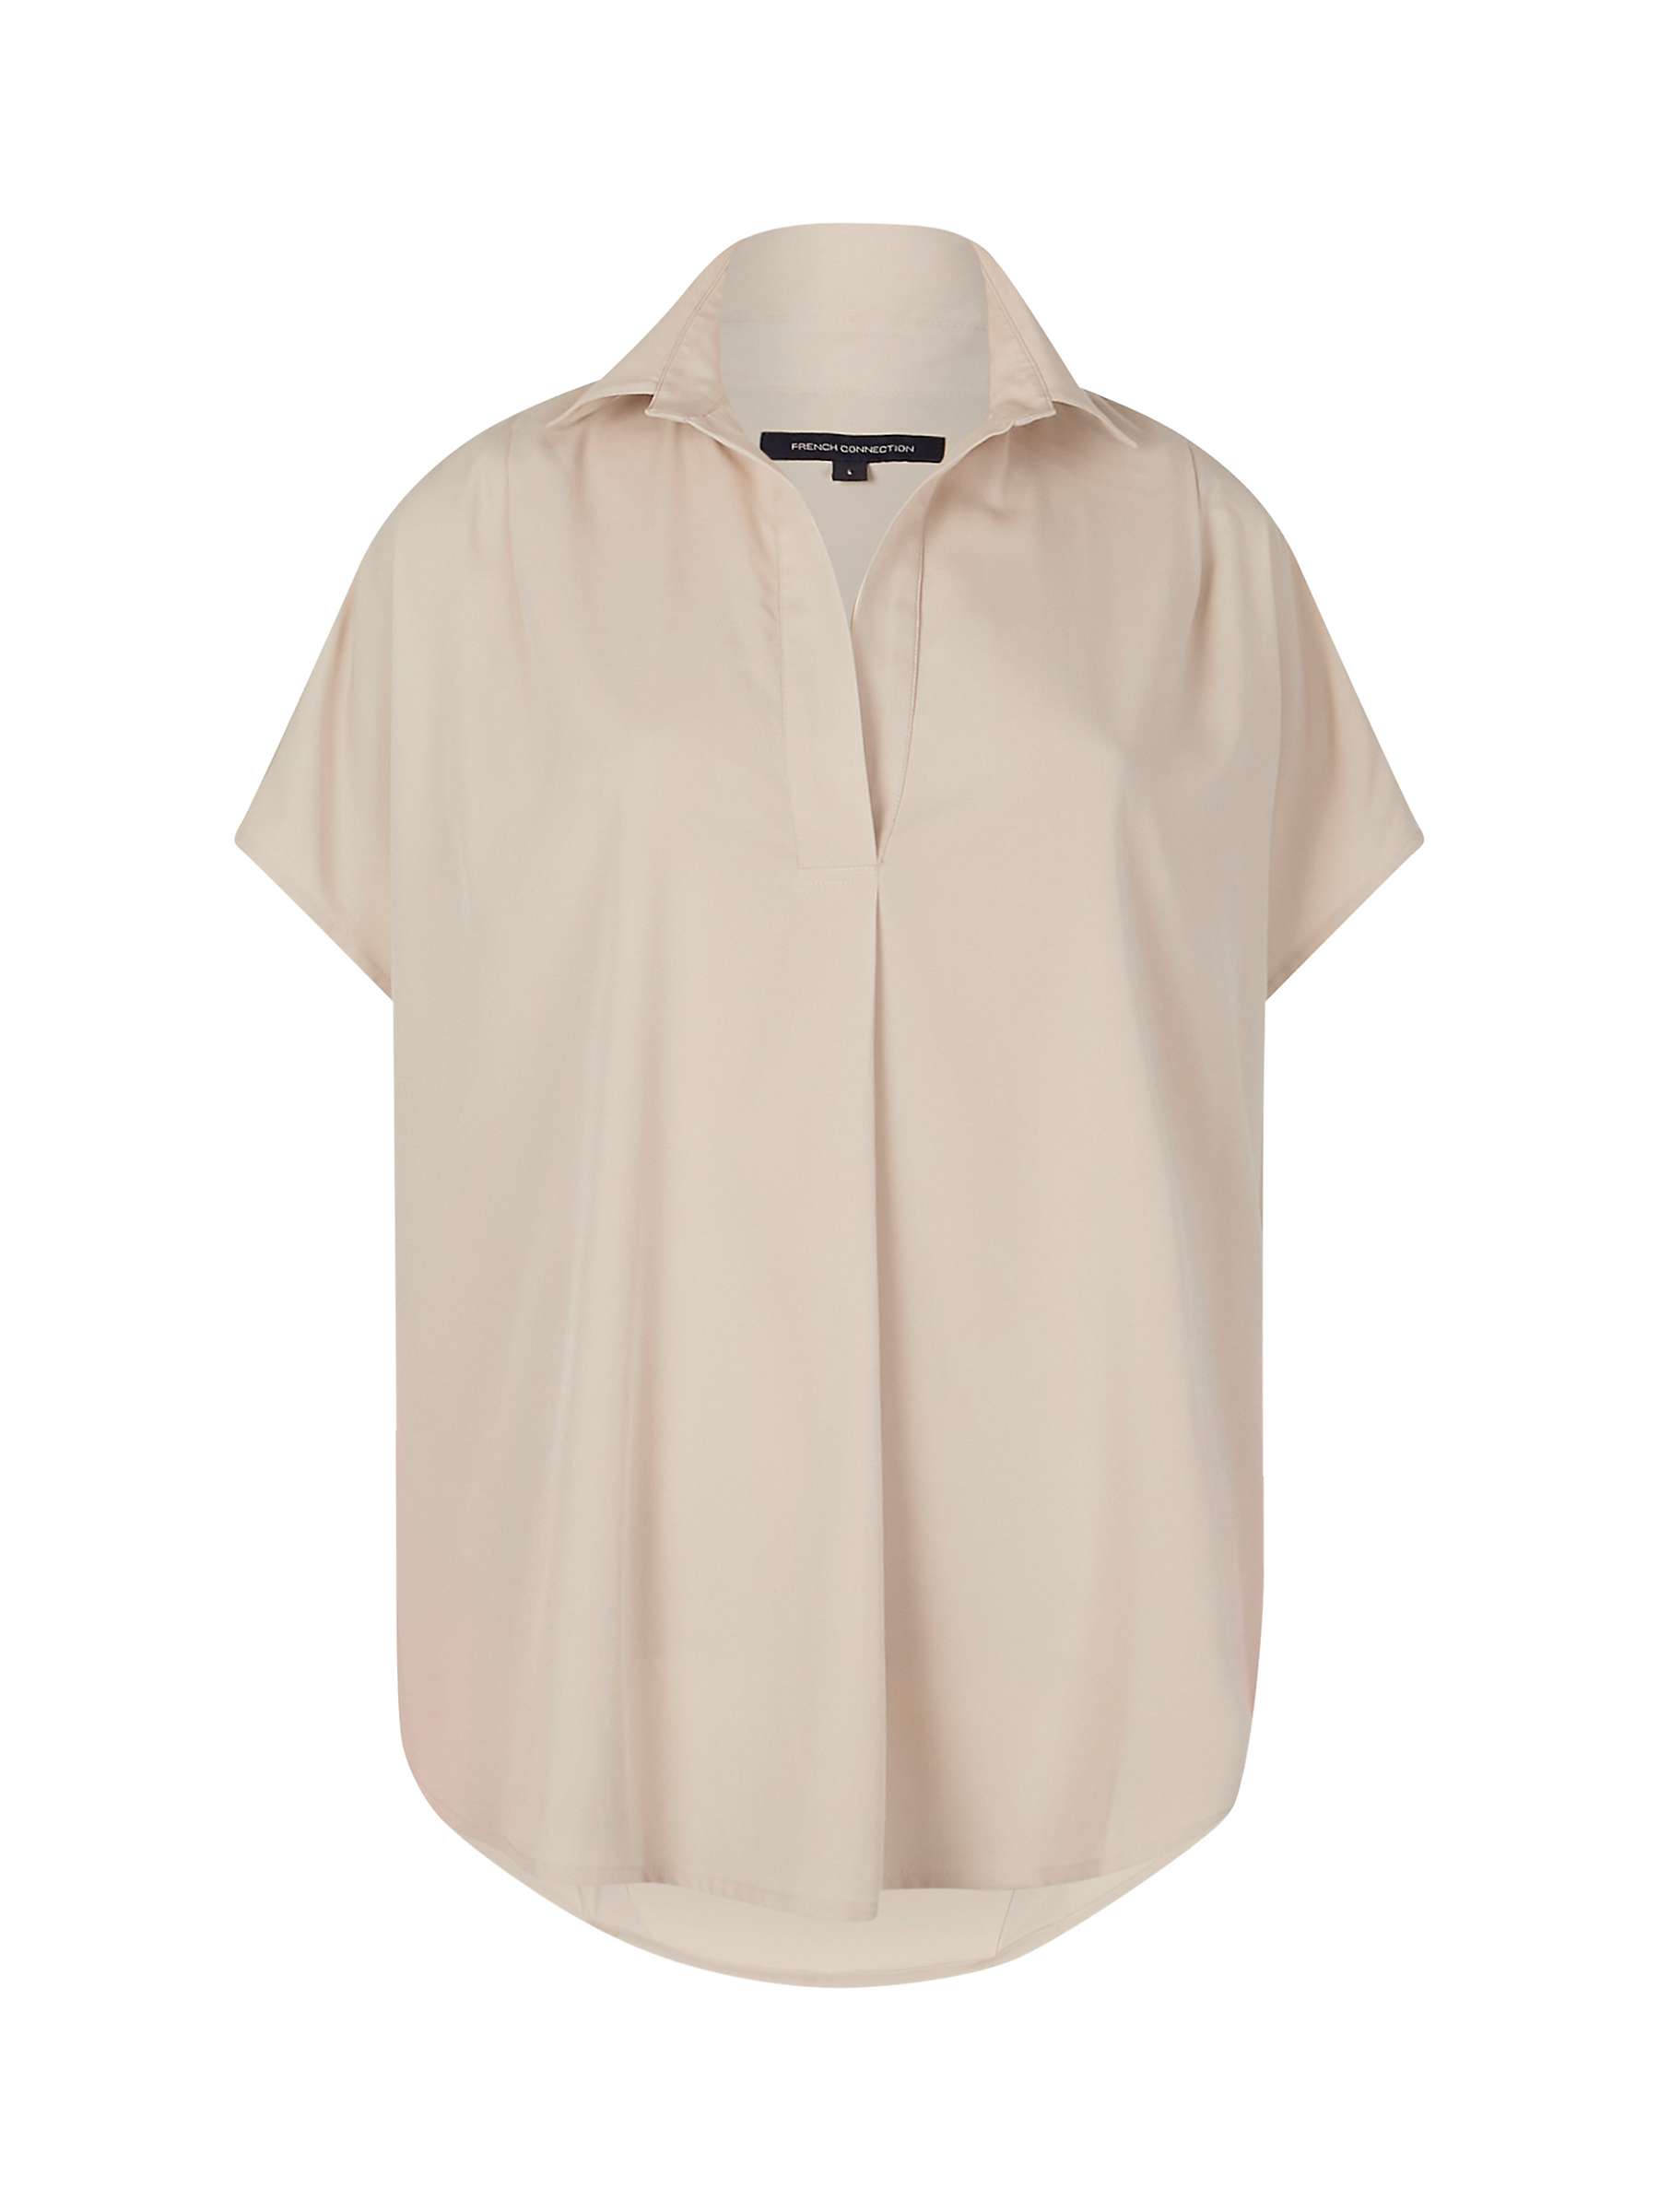 Buy French Connection Crepe Sleeveless Popover Top, Silver Lining Online at johnlewis.com